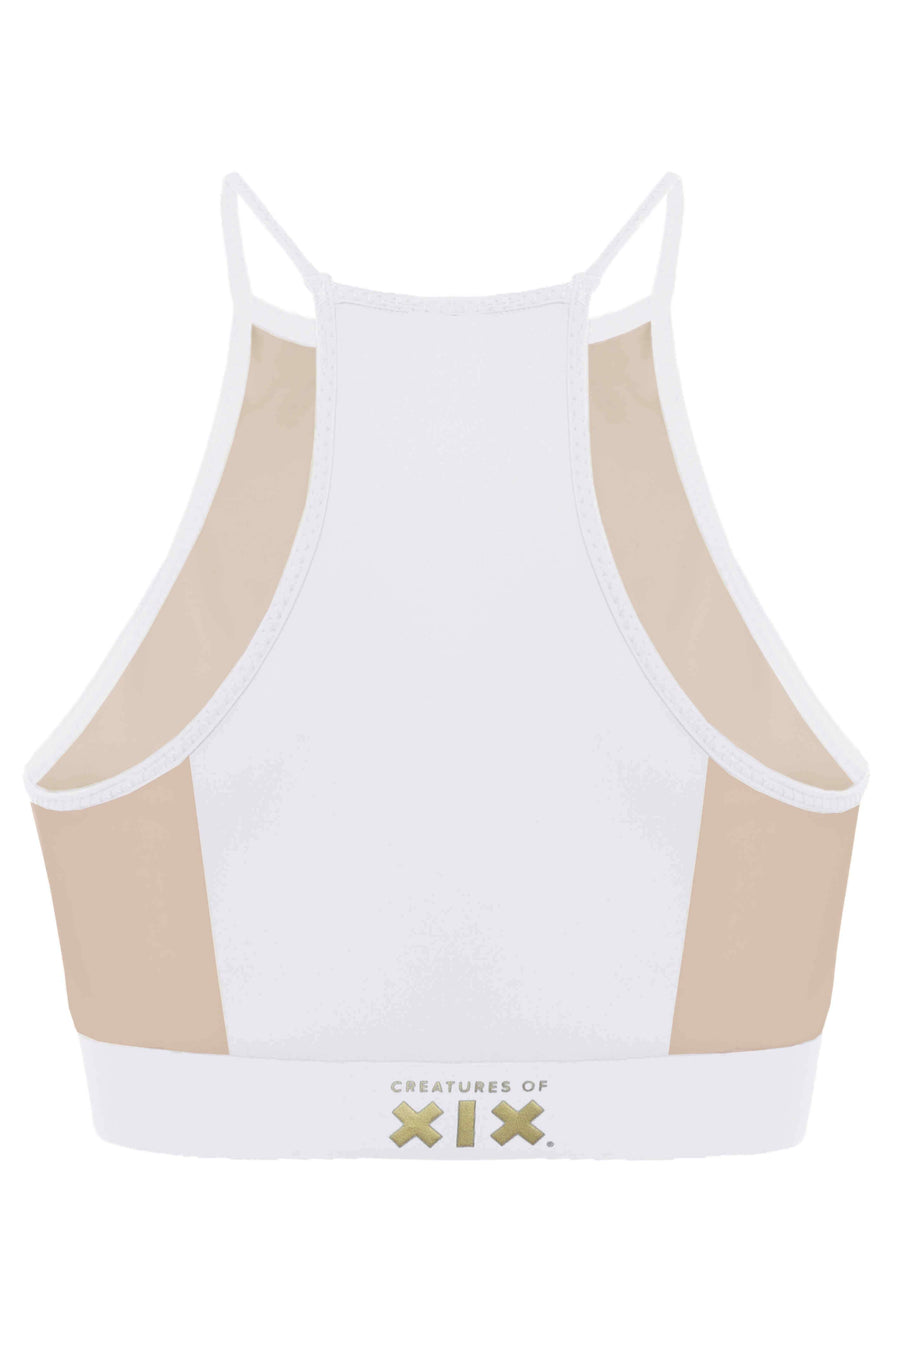 I-EXE Made in Italy - Multizone Compression Sleeveless Women's Shirt Tank- Top - Color: White with Red - SKATE GURU INC